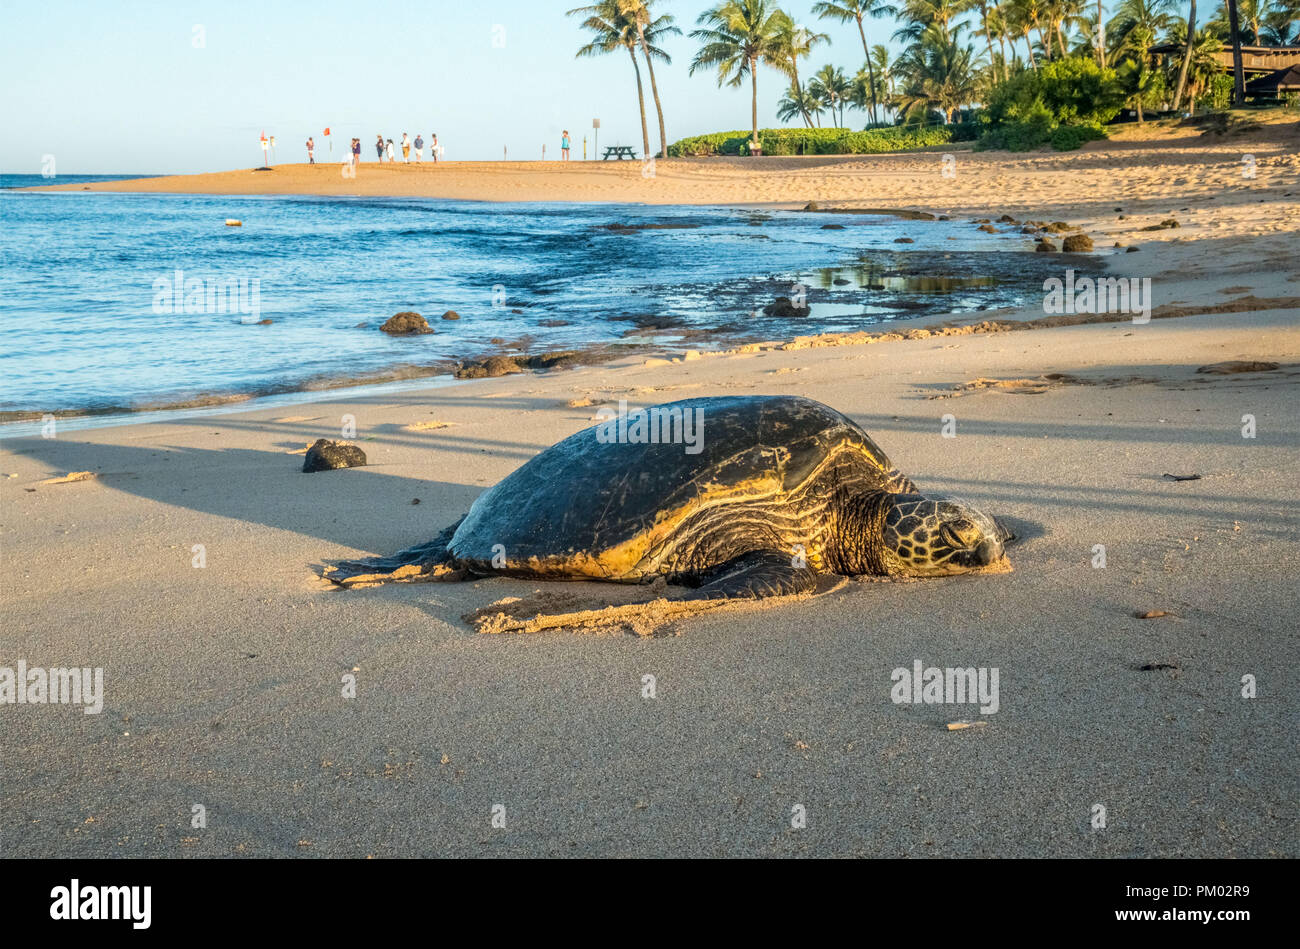 Honu (Hawaiian Sea Turtle) come on shore to rest. There are 2 in this image, one is at the top left where people are watching it. Stock Photo